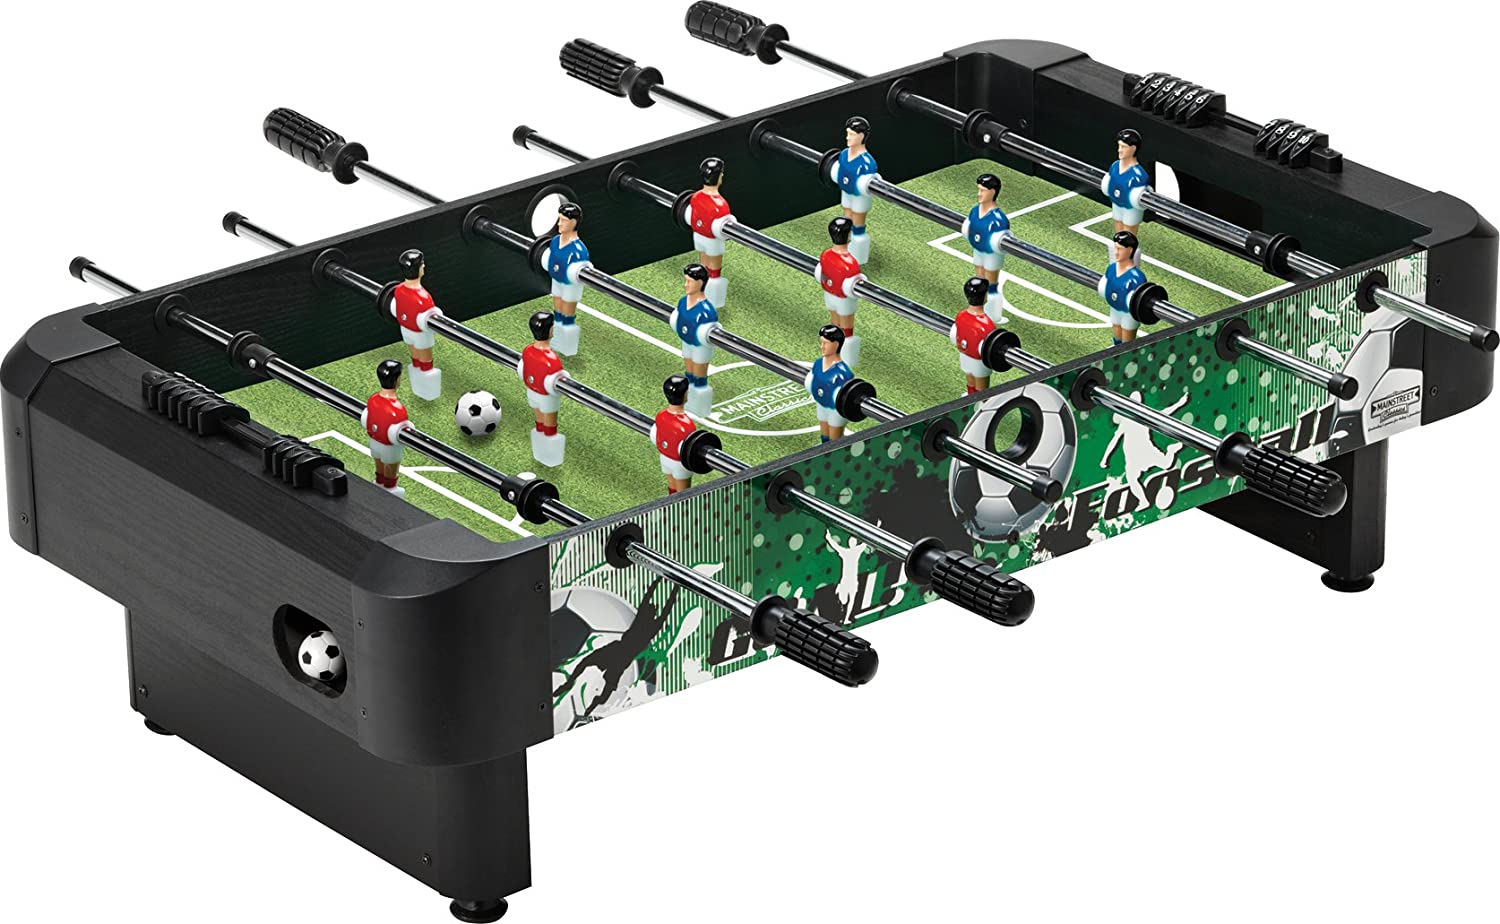 36-Inch Mainstreet Classics Table Top Foosball/Soccer Game $57 + free s/h at Amazon